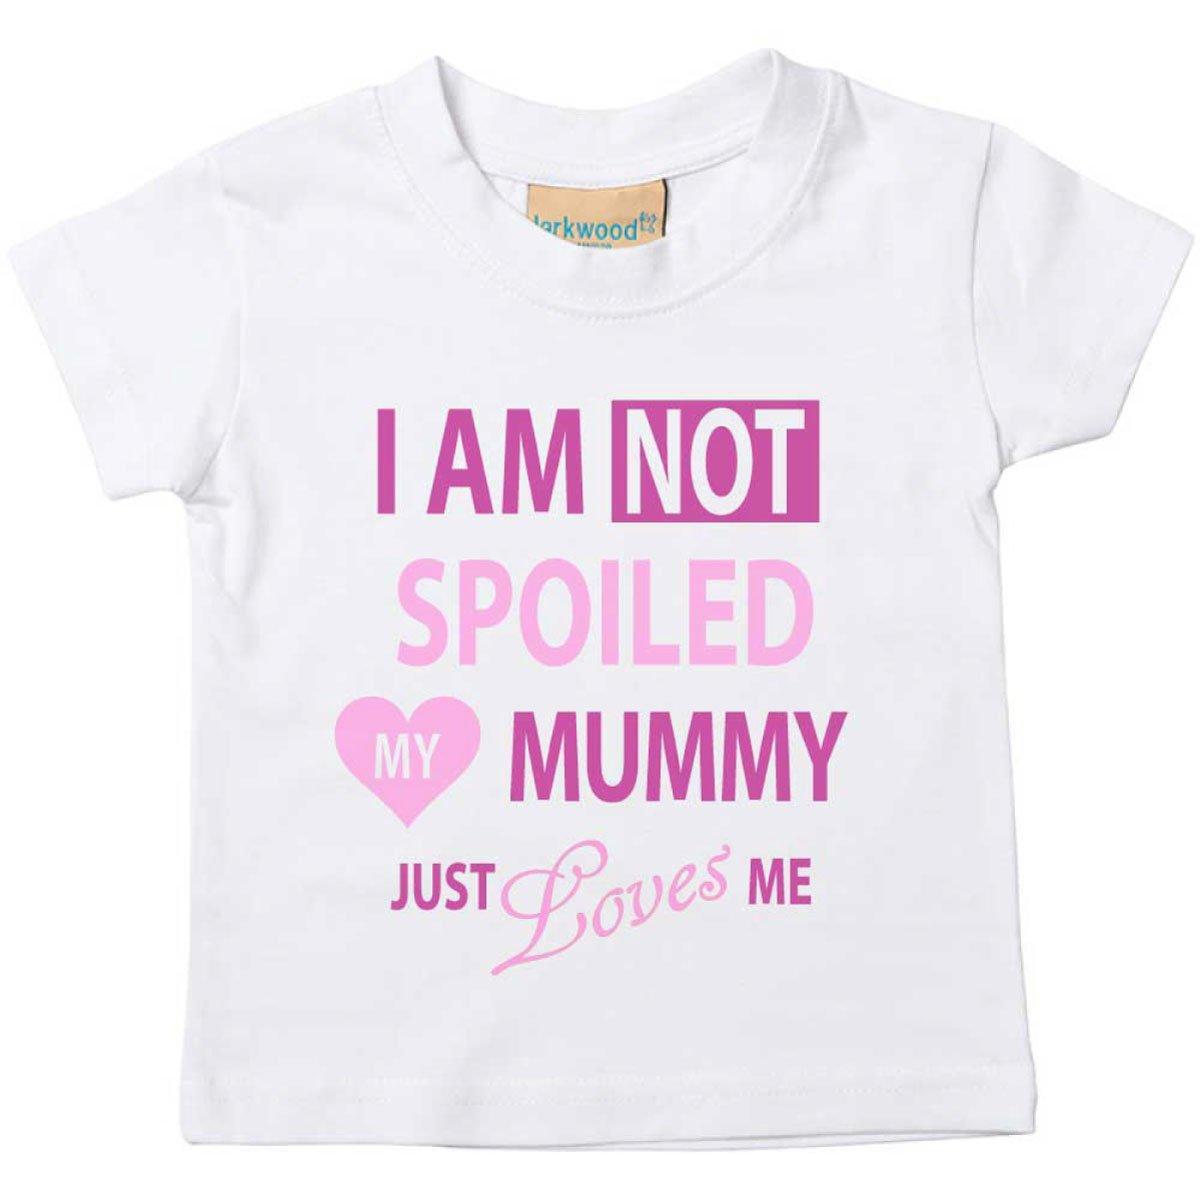 I’m Not Spoiled My Mummy Just Loves Me Tshirt